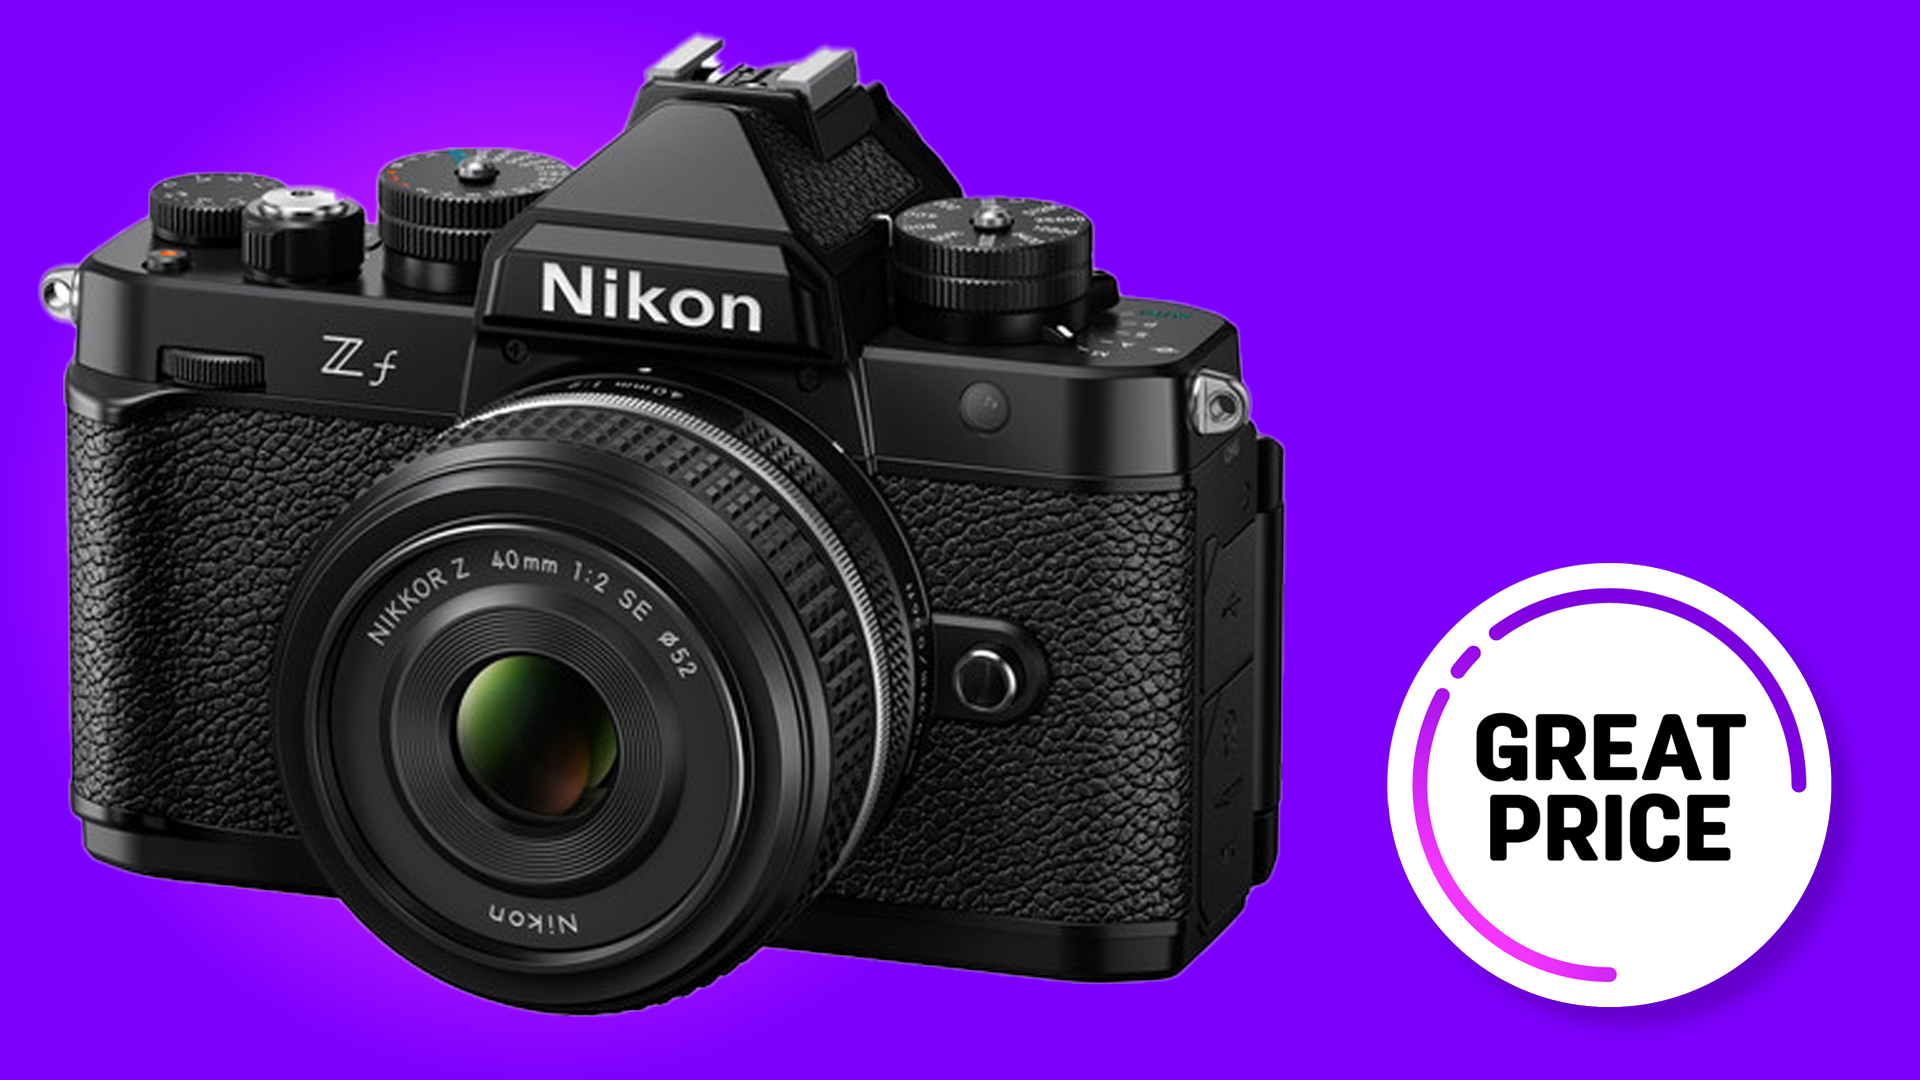 Grab the Nikon Zf with retro 40mm at its lowest EVER price!